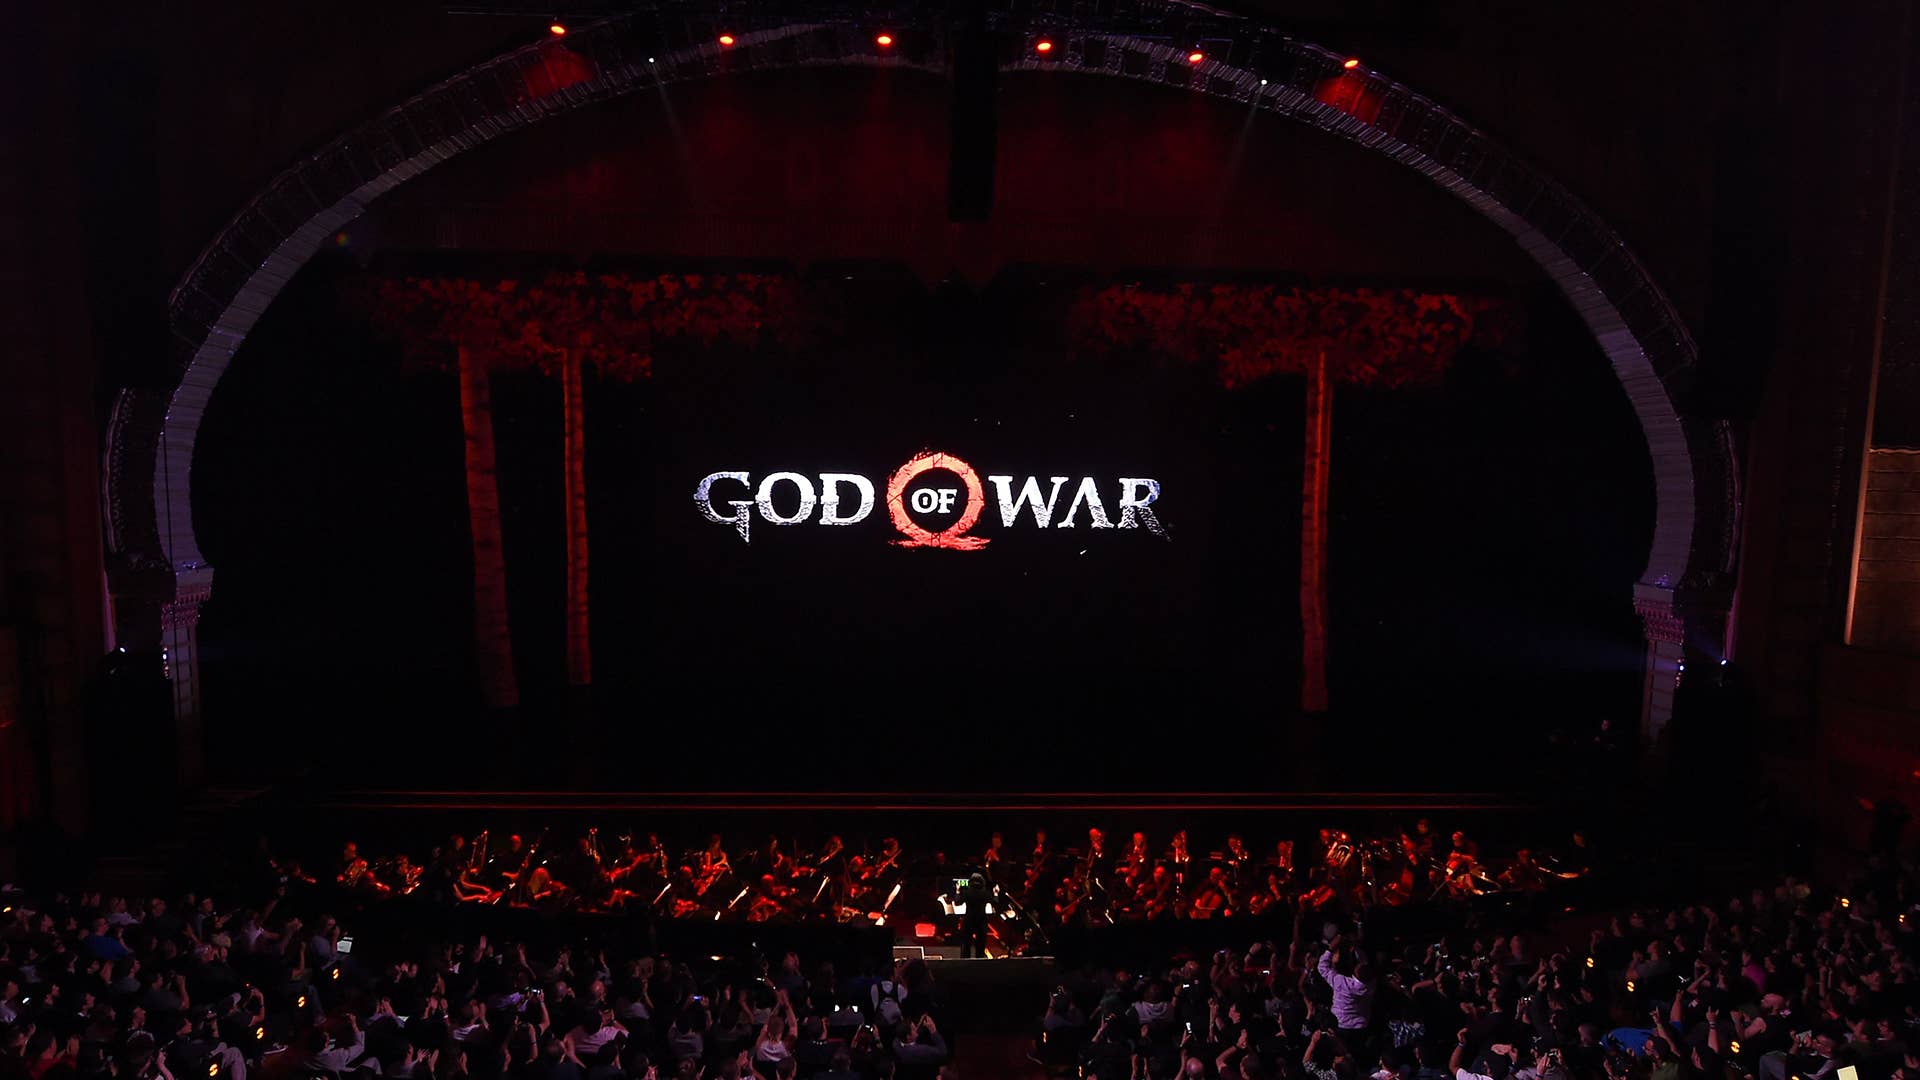 God of War as presented at Sony PlayStation's 2016 E3 press conference.